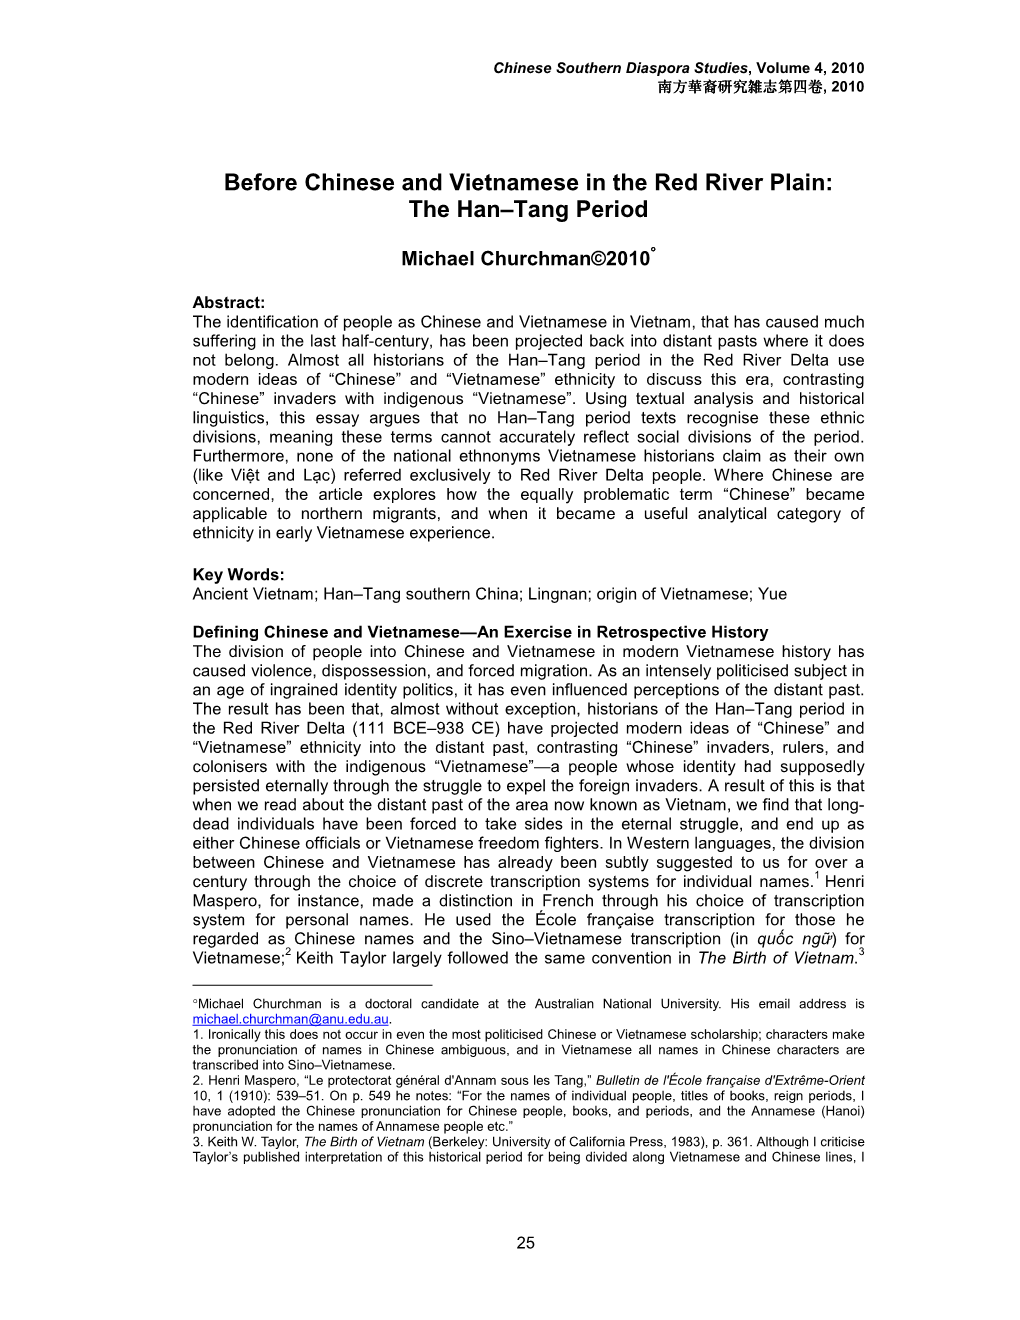 Before Chinese and Vietnamese in the Red River Plain: the Han–Tang Period